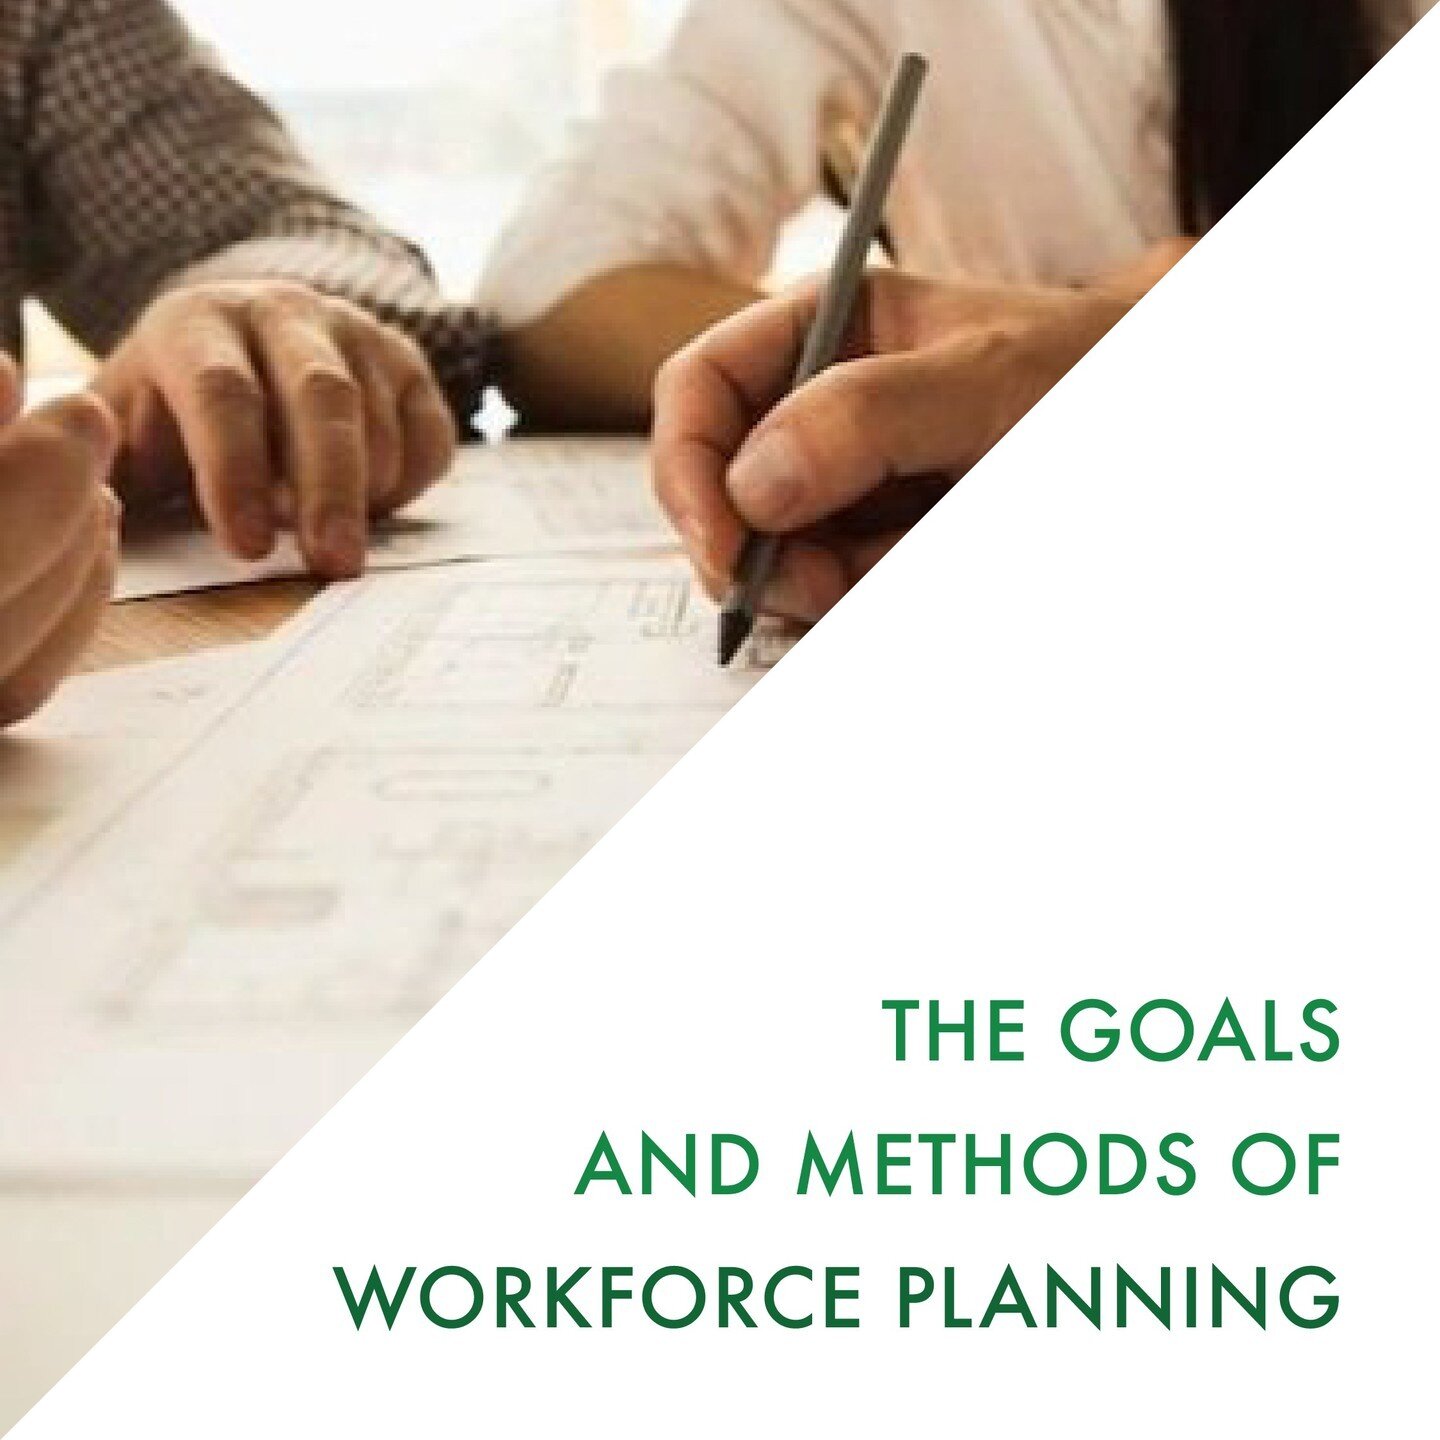 Despite increasing knowledge, companies do not usually apply the workforce planning approach. We have created an easy procedure to manage workforce planning efficiently for your company.

For more information please visit the link on our bio, under t